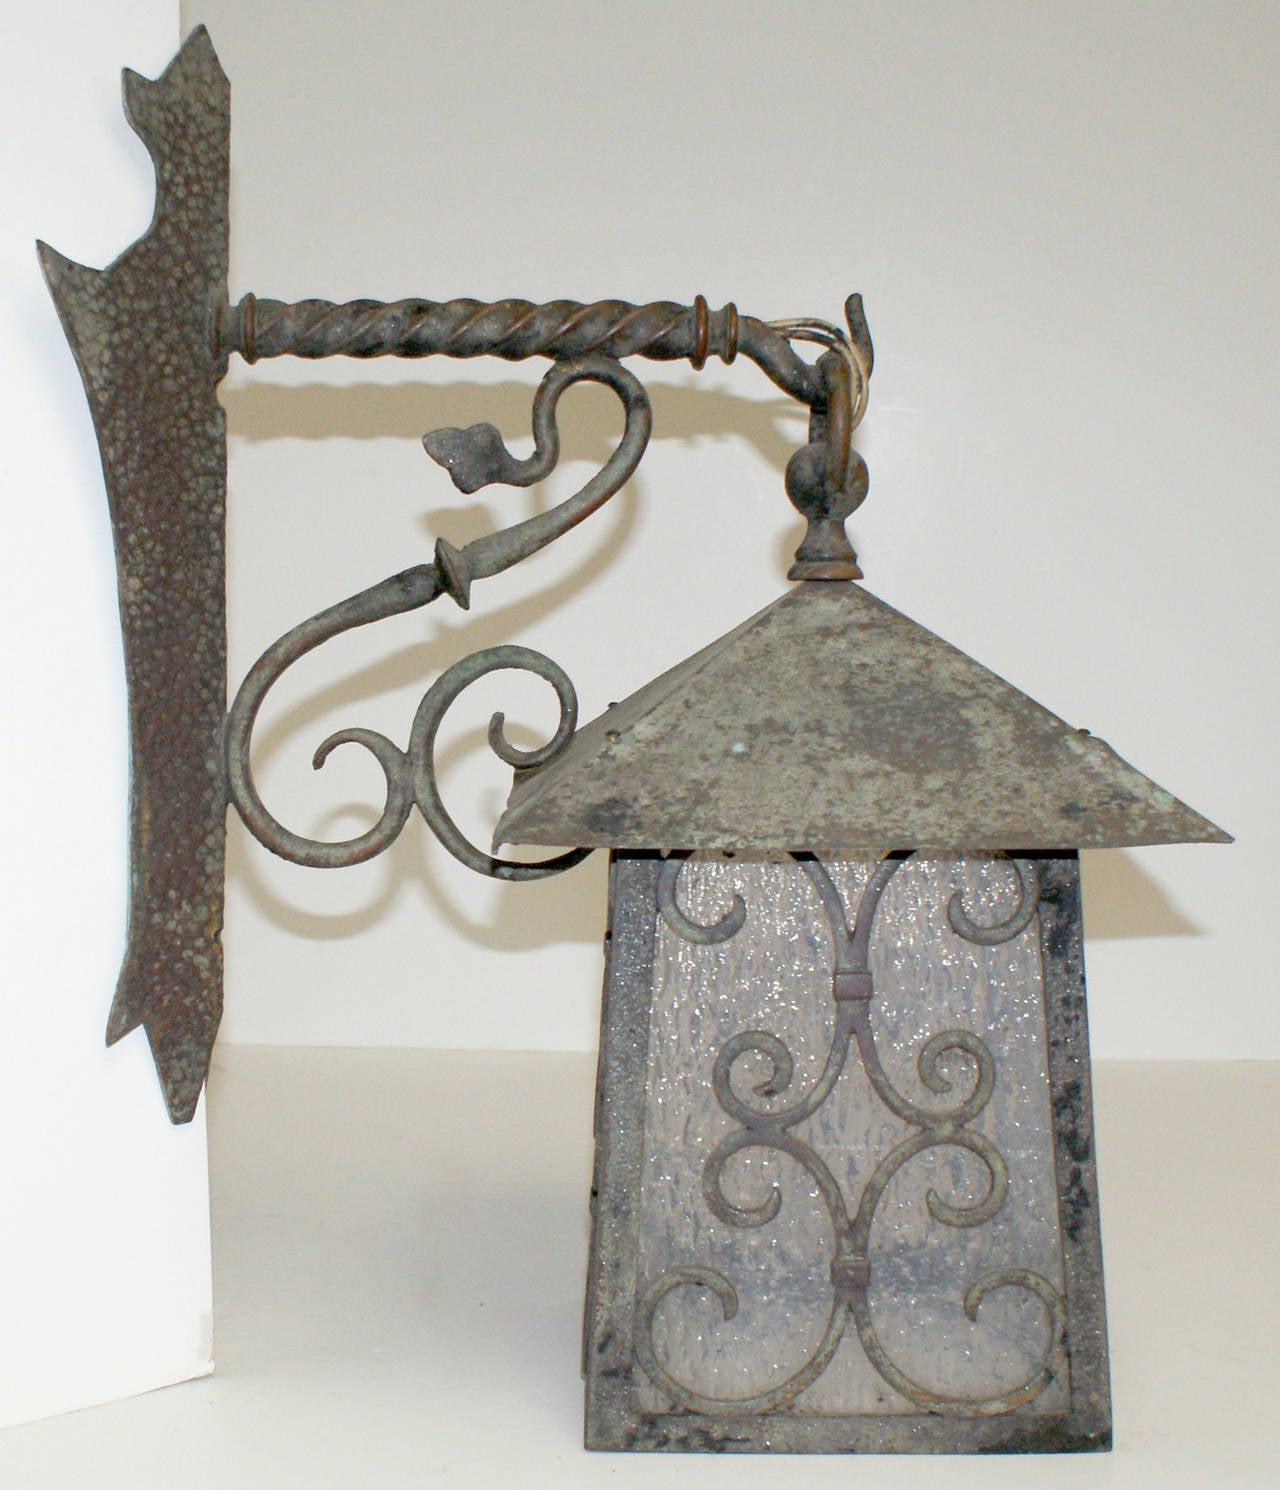 Nicely patinated antique bronze Arts and Crafts style corner mount exterior lantern sconce having hammered backplate, decorative scrolled metalwork and textured glass shade.